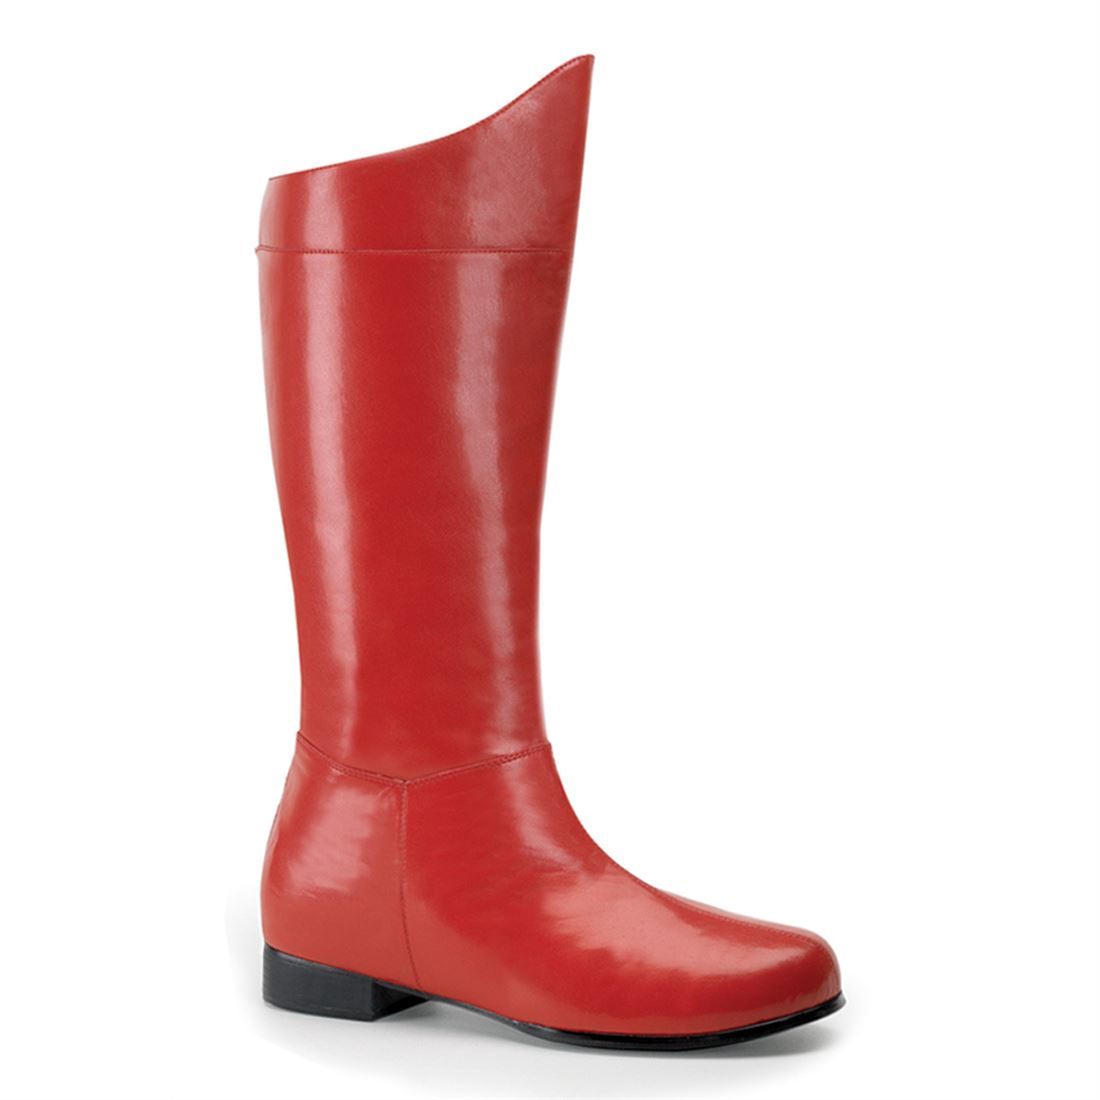 Superhero Boots - Red Faux Leather